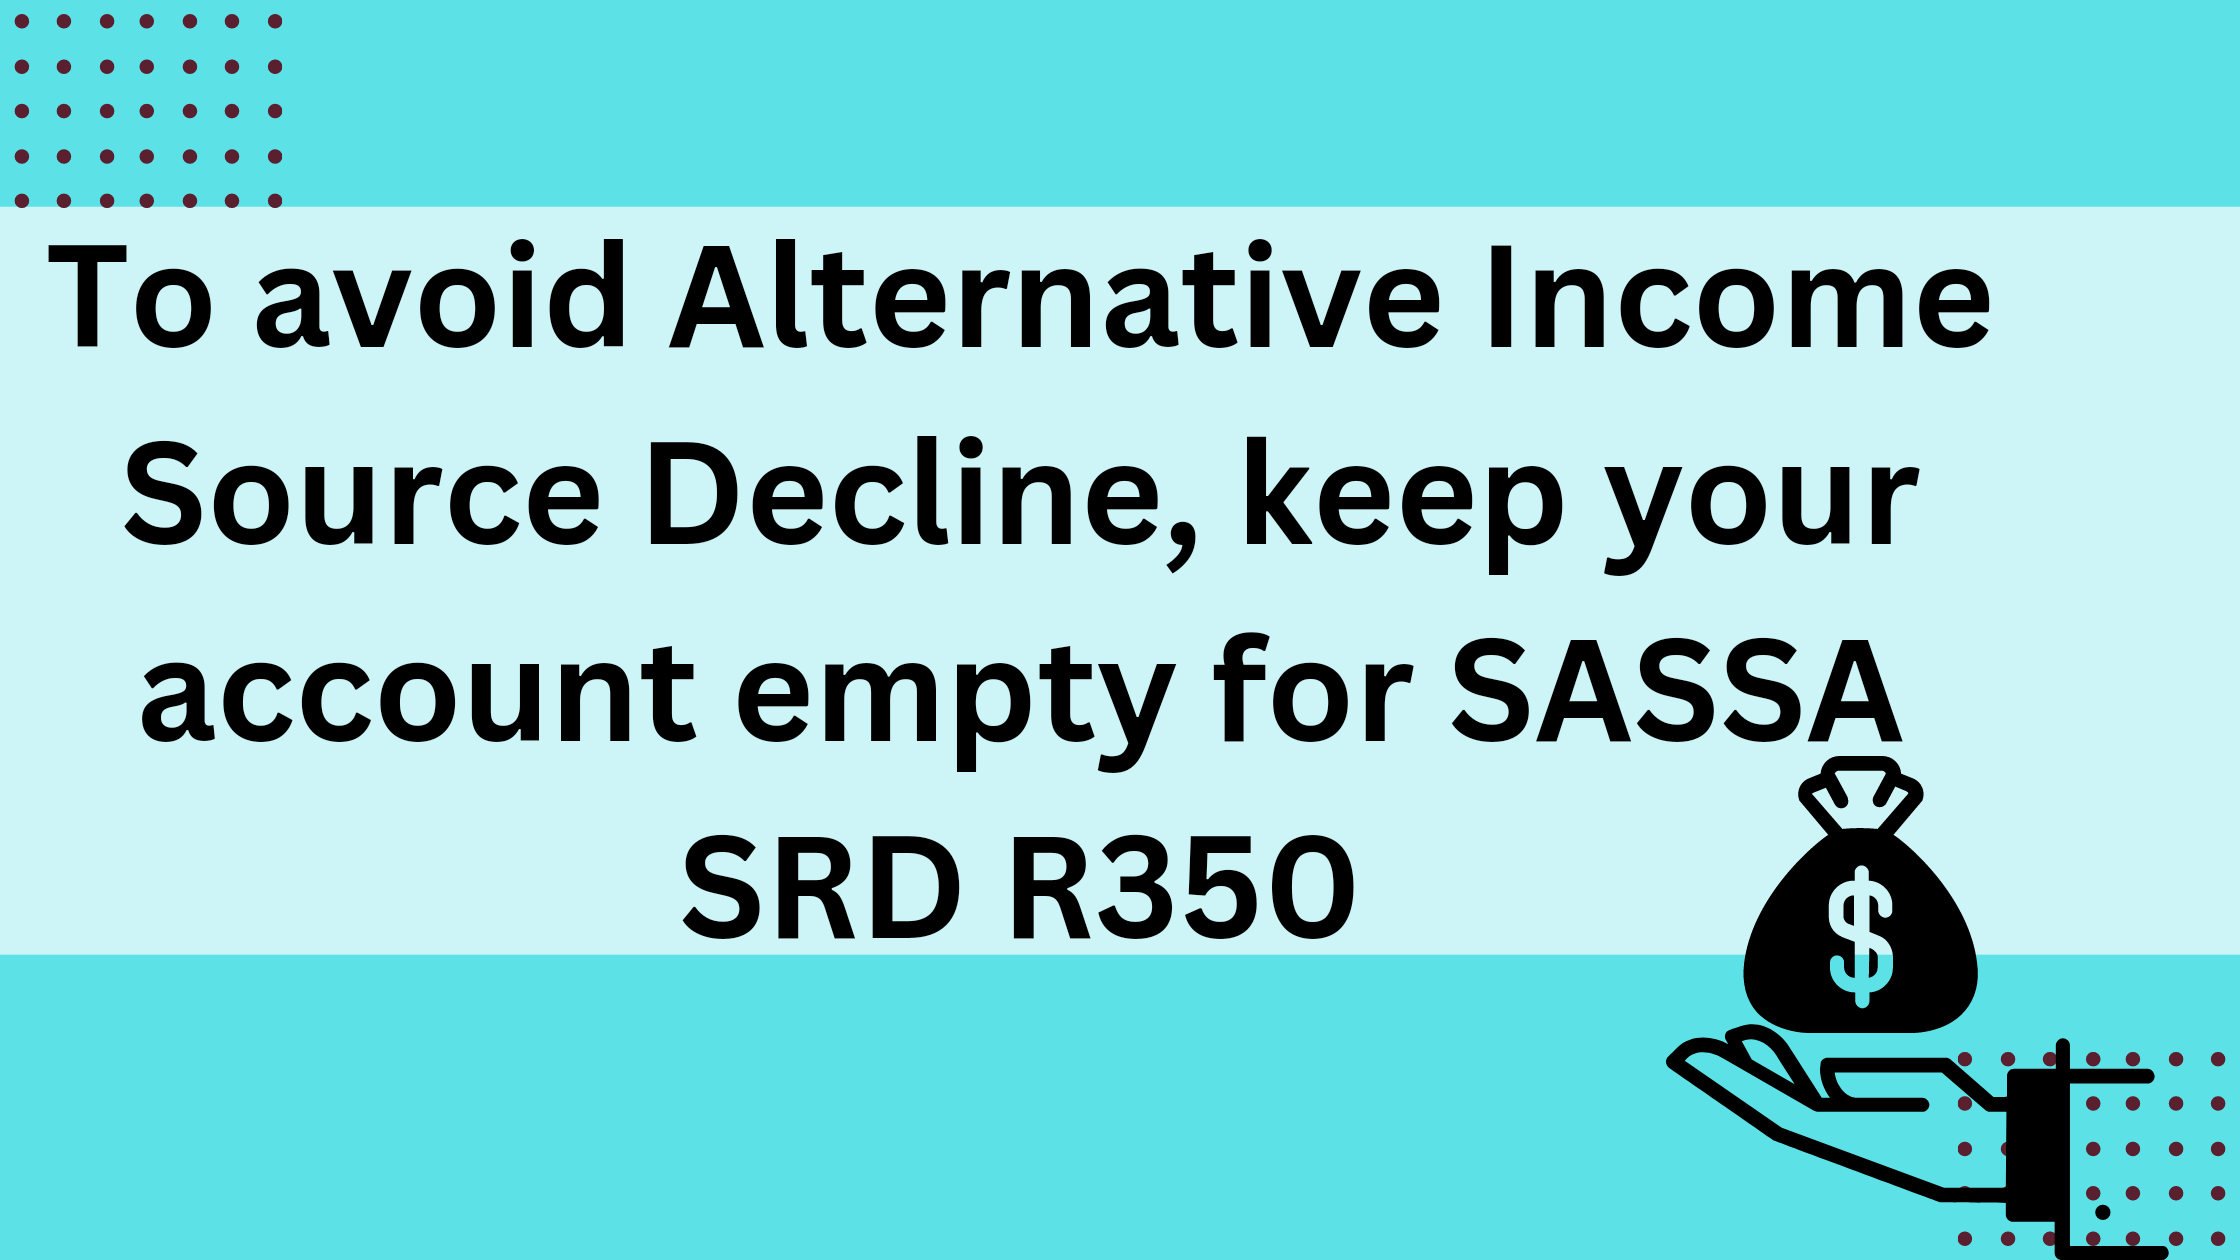 To avoid Alternative Income Source Decline, keep your account empty for SASSA SRD R350